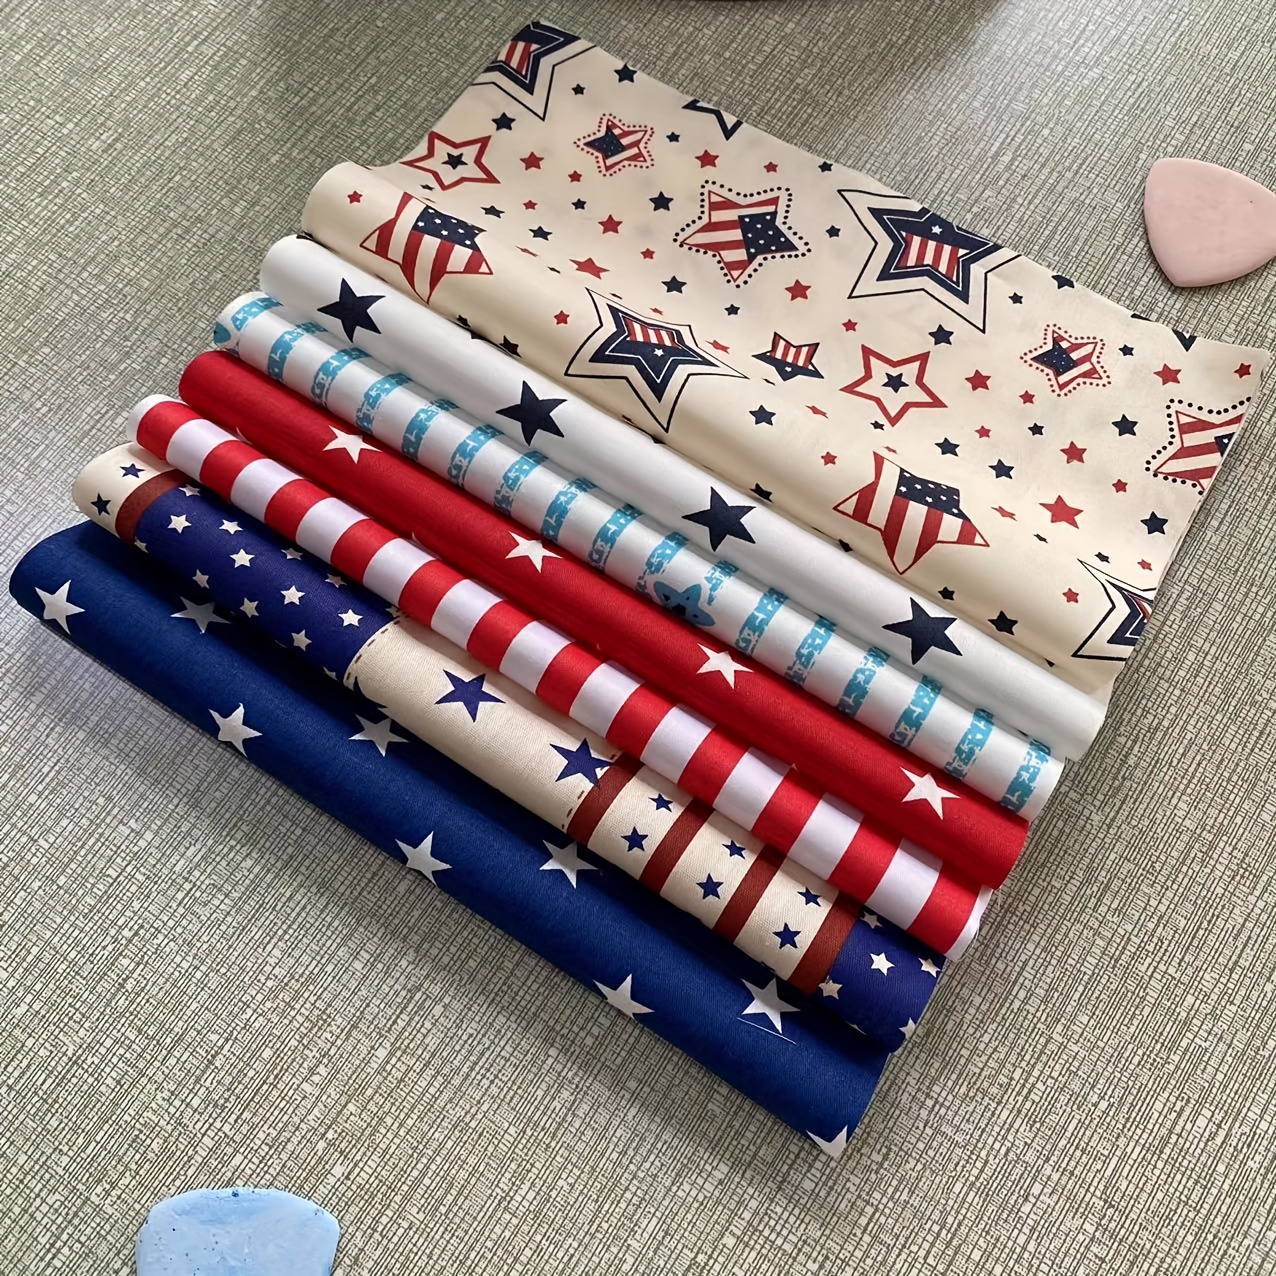 

7pcs Patriotic Large Cotton Coat 9.8 X 9.8 Inches Stars And Stripes Fabric Independence Day July 4th American Flag Print Quilt, Star Stripes Hand Quilted Easter Gift